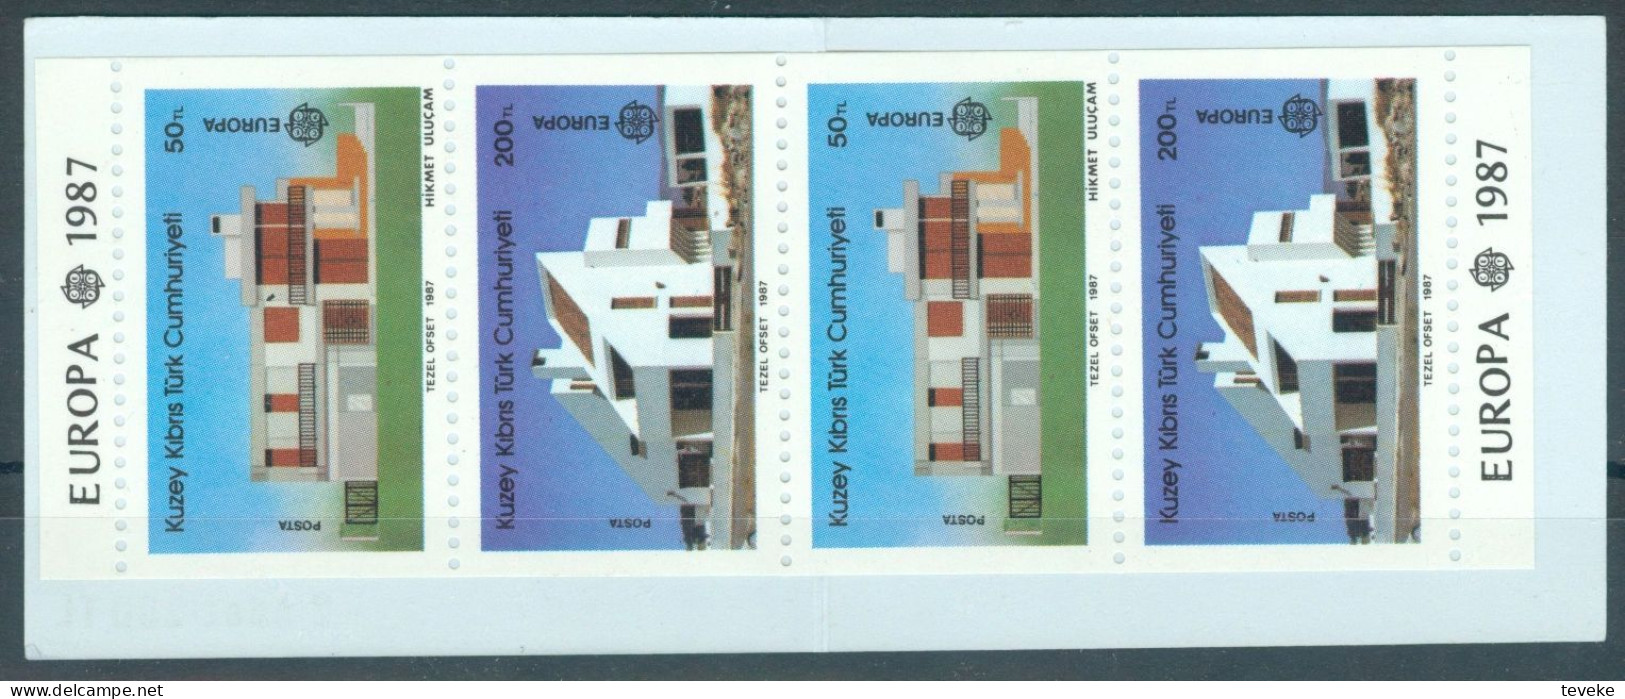 TURKISH CYPRUS 1987 - Michel Nr. MH1 - MNH ** - EUROPA/CEPT - Modern Architecture - Unused Stamps